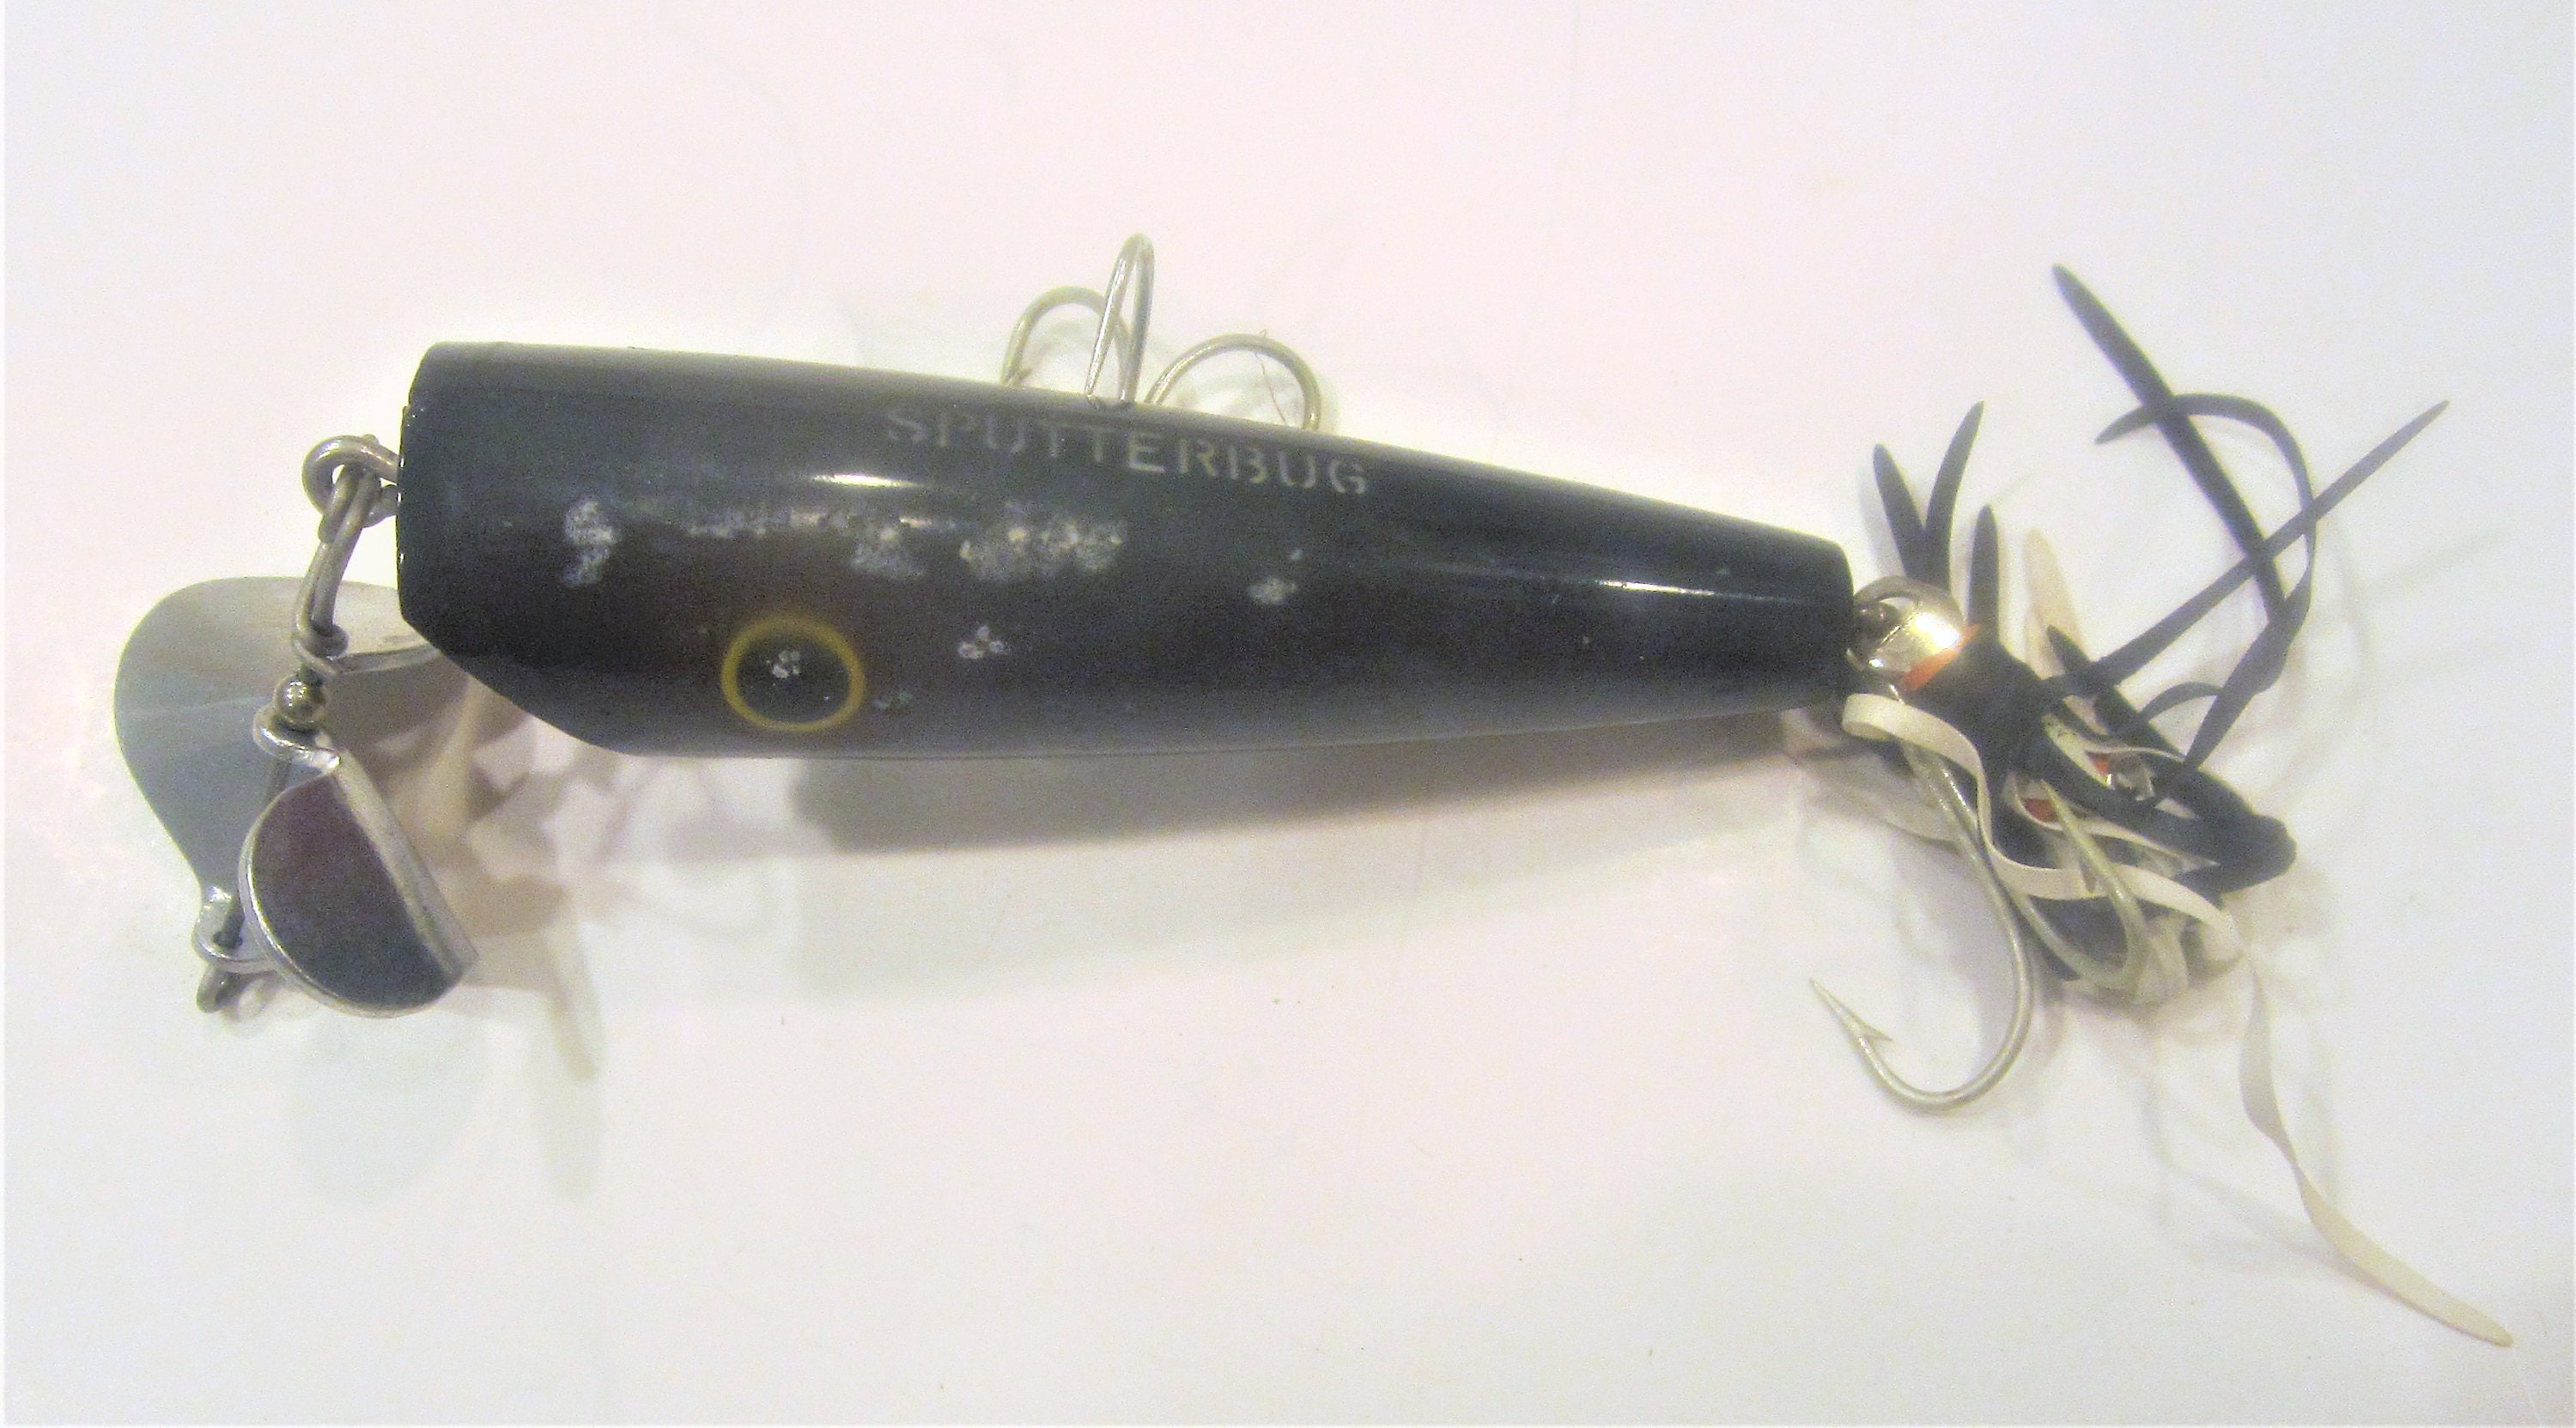 Vintage Sputterbug Lure / by Fred Arbogast / New in Box / Issued